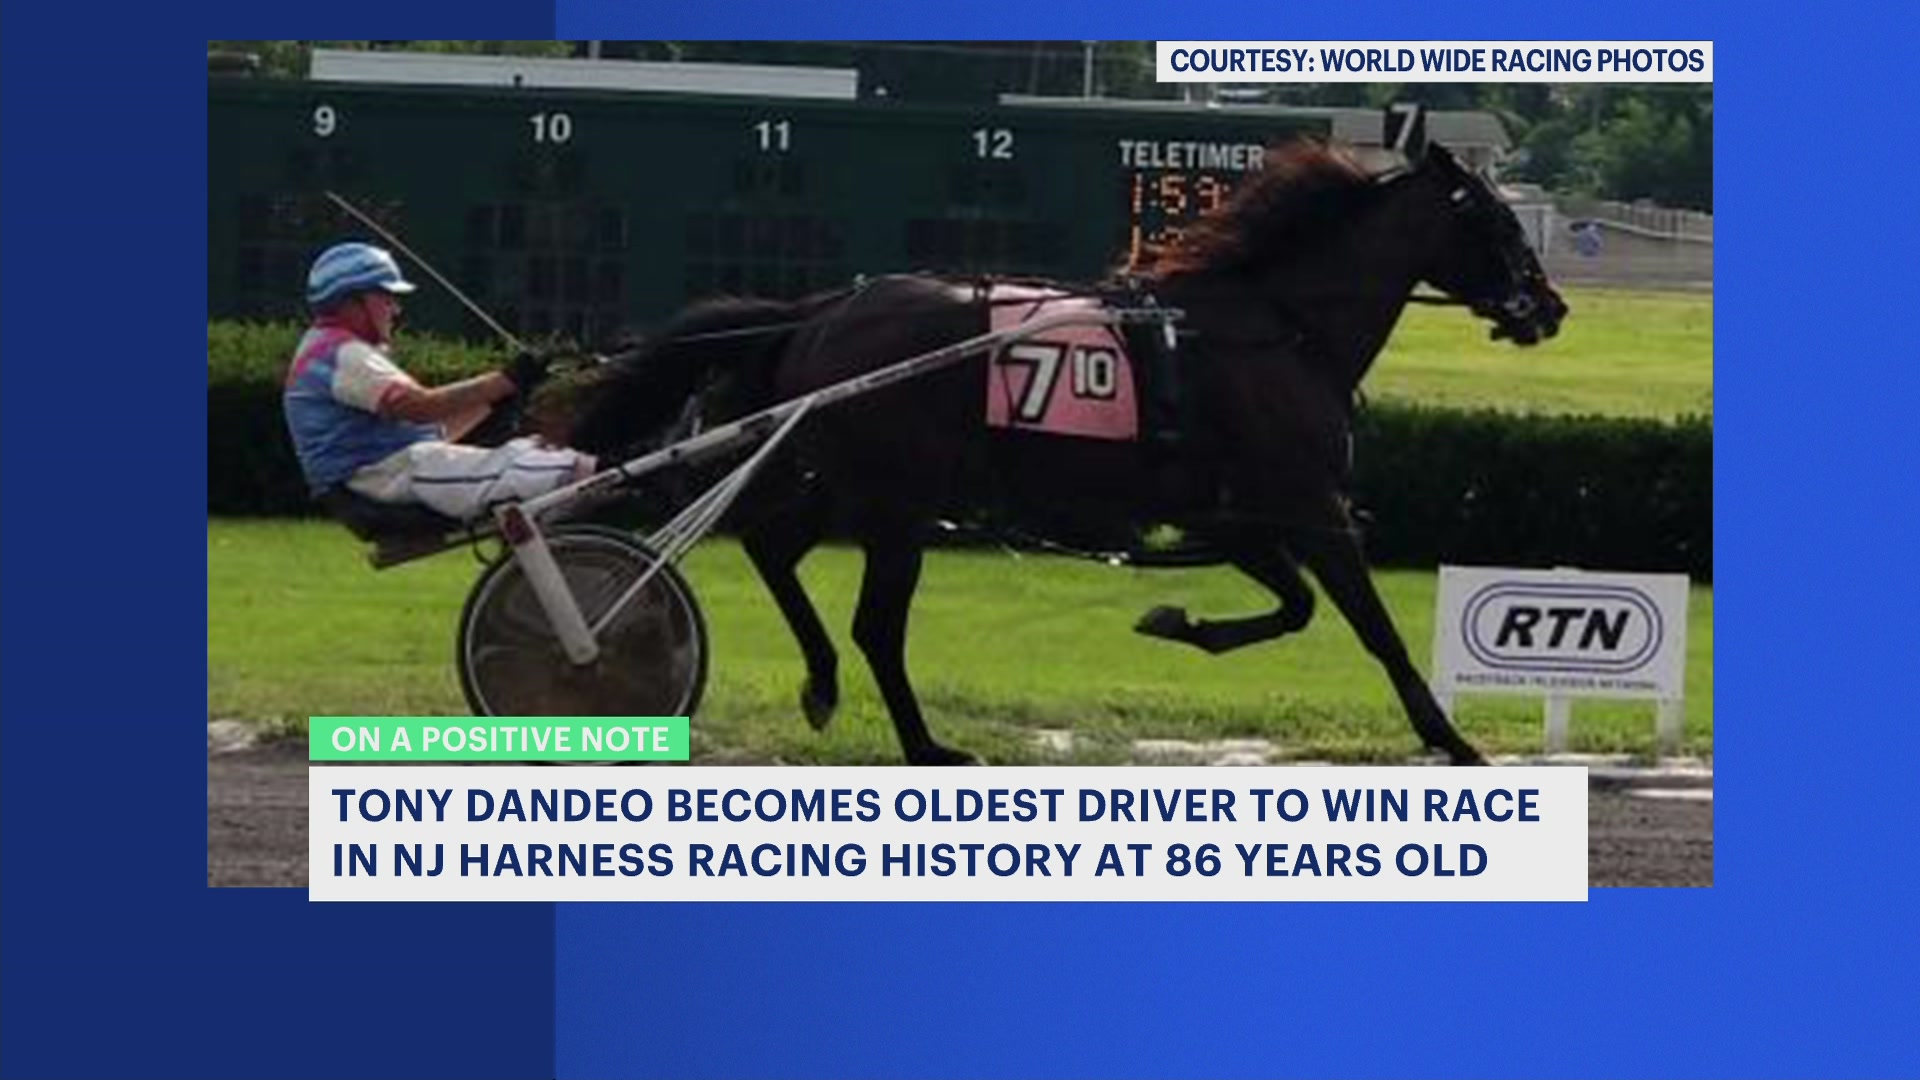 Driver breaks record at 86 as oldest one to win harness race at ...